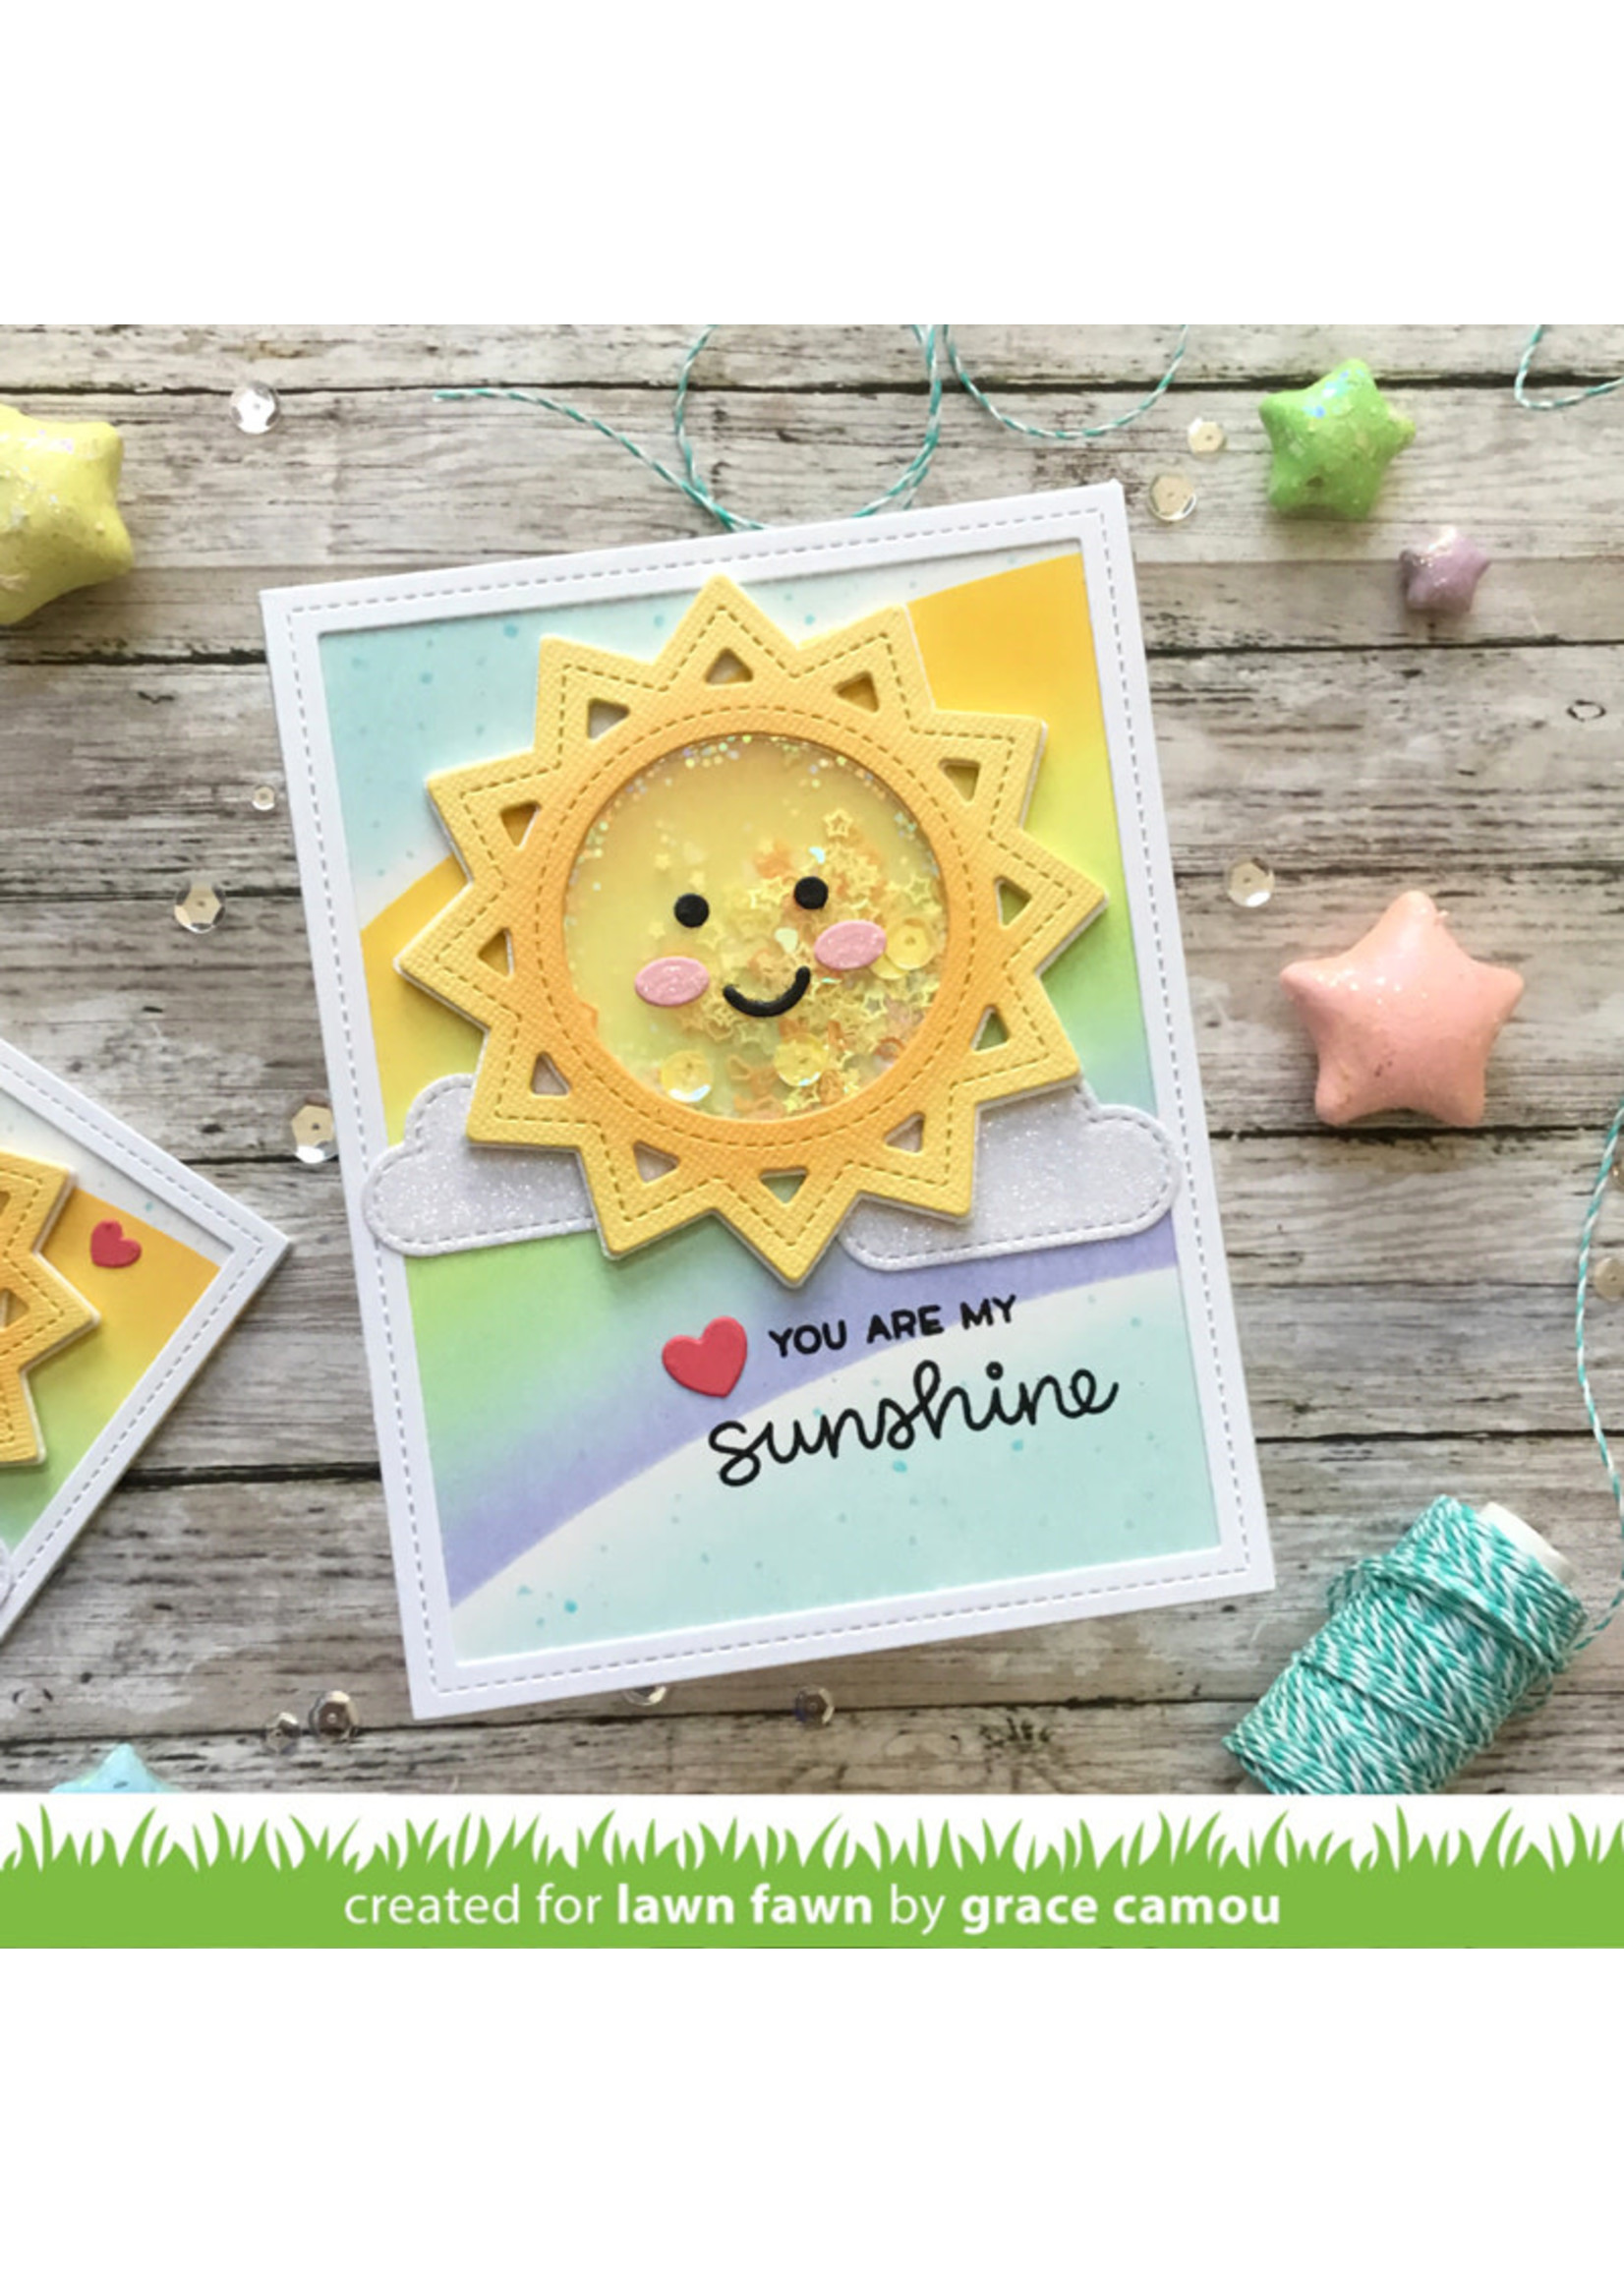 Lawn Fawn stitched sun frame die